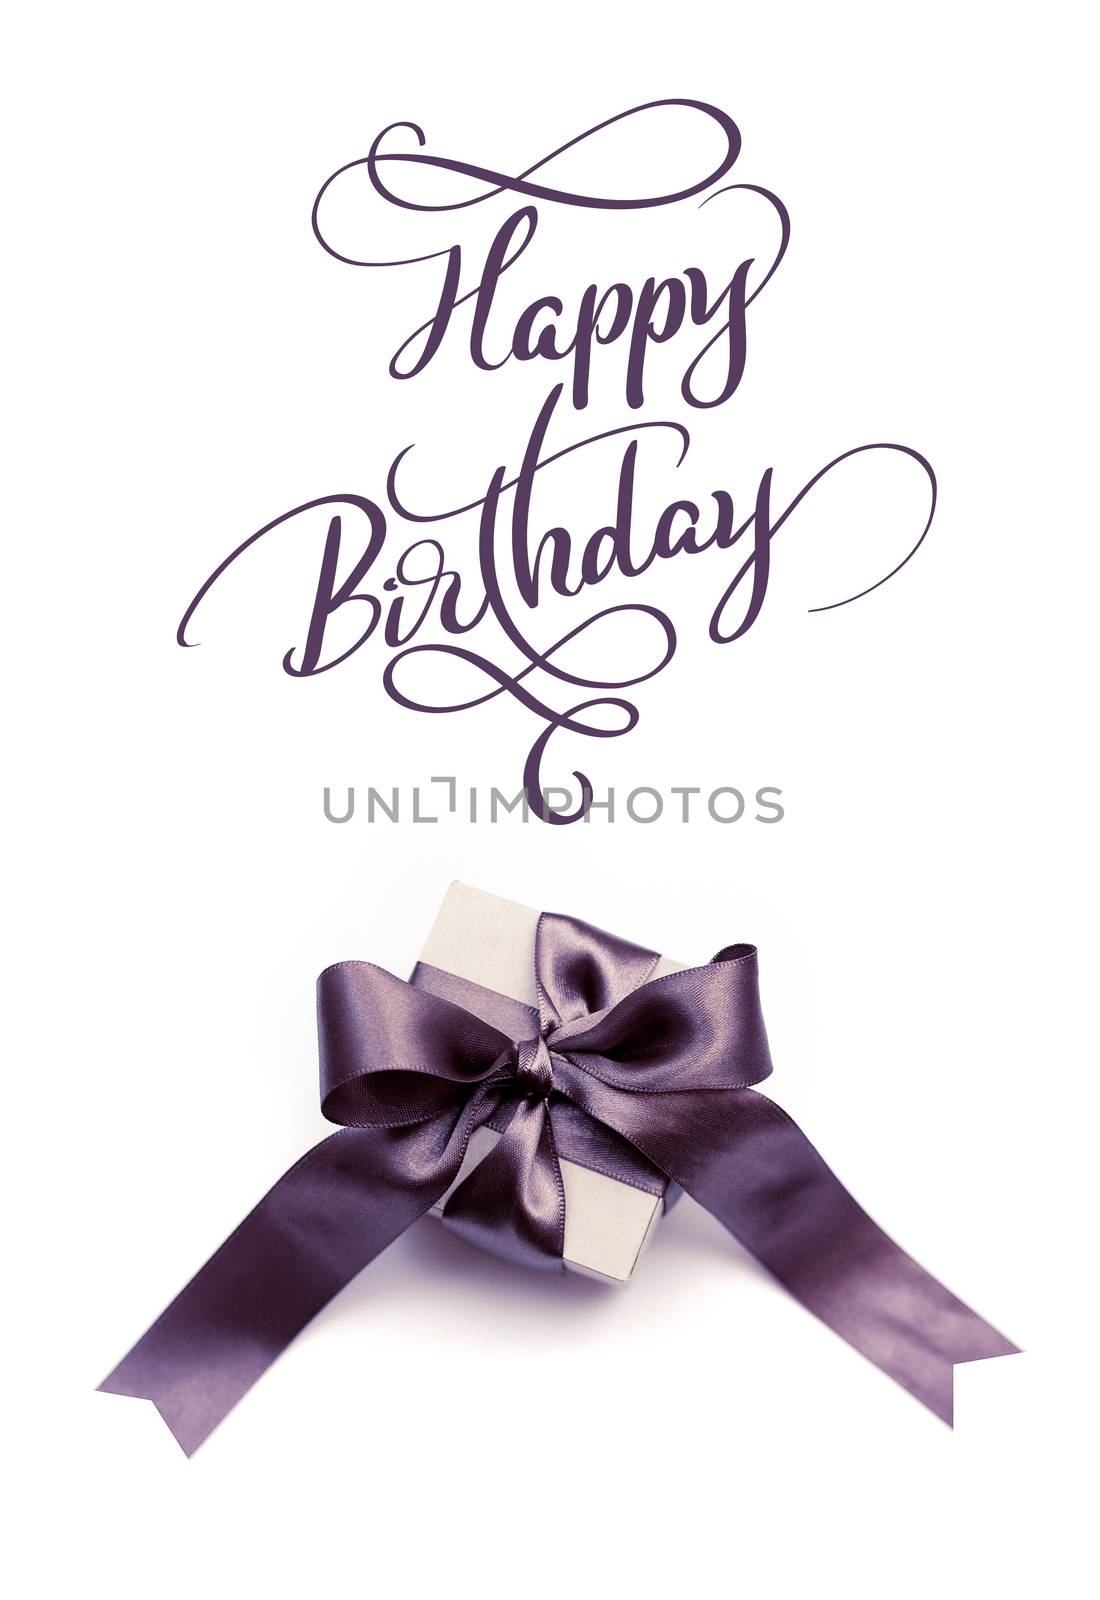 Gift box with brown bow on a white background and text Happy Birthday. Calligraphy lettering.